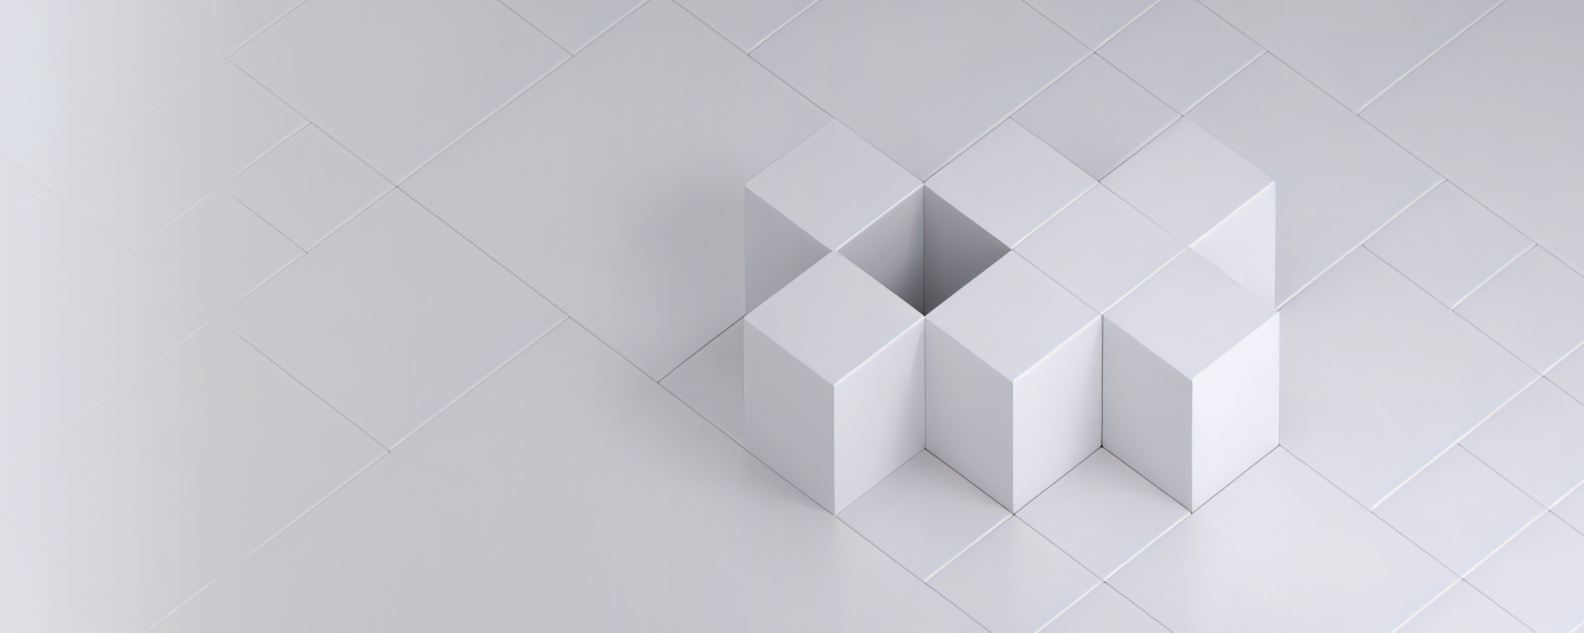 Illustration of seven white cubes arranged on a white grid of squares creating a pattern